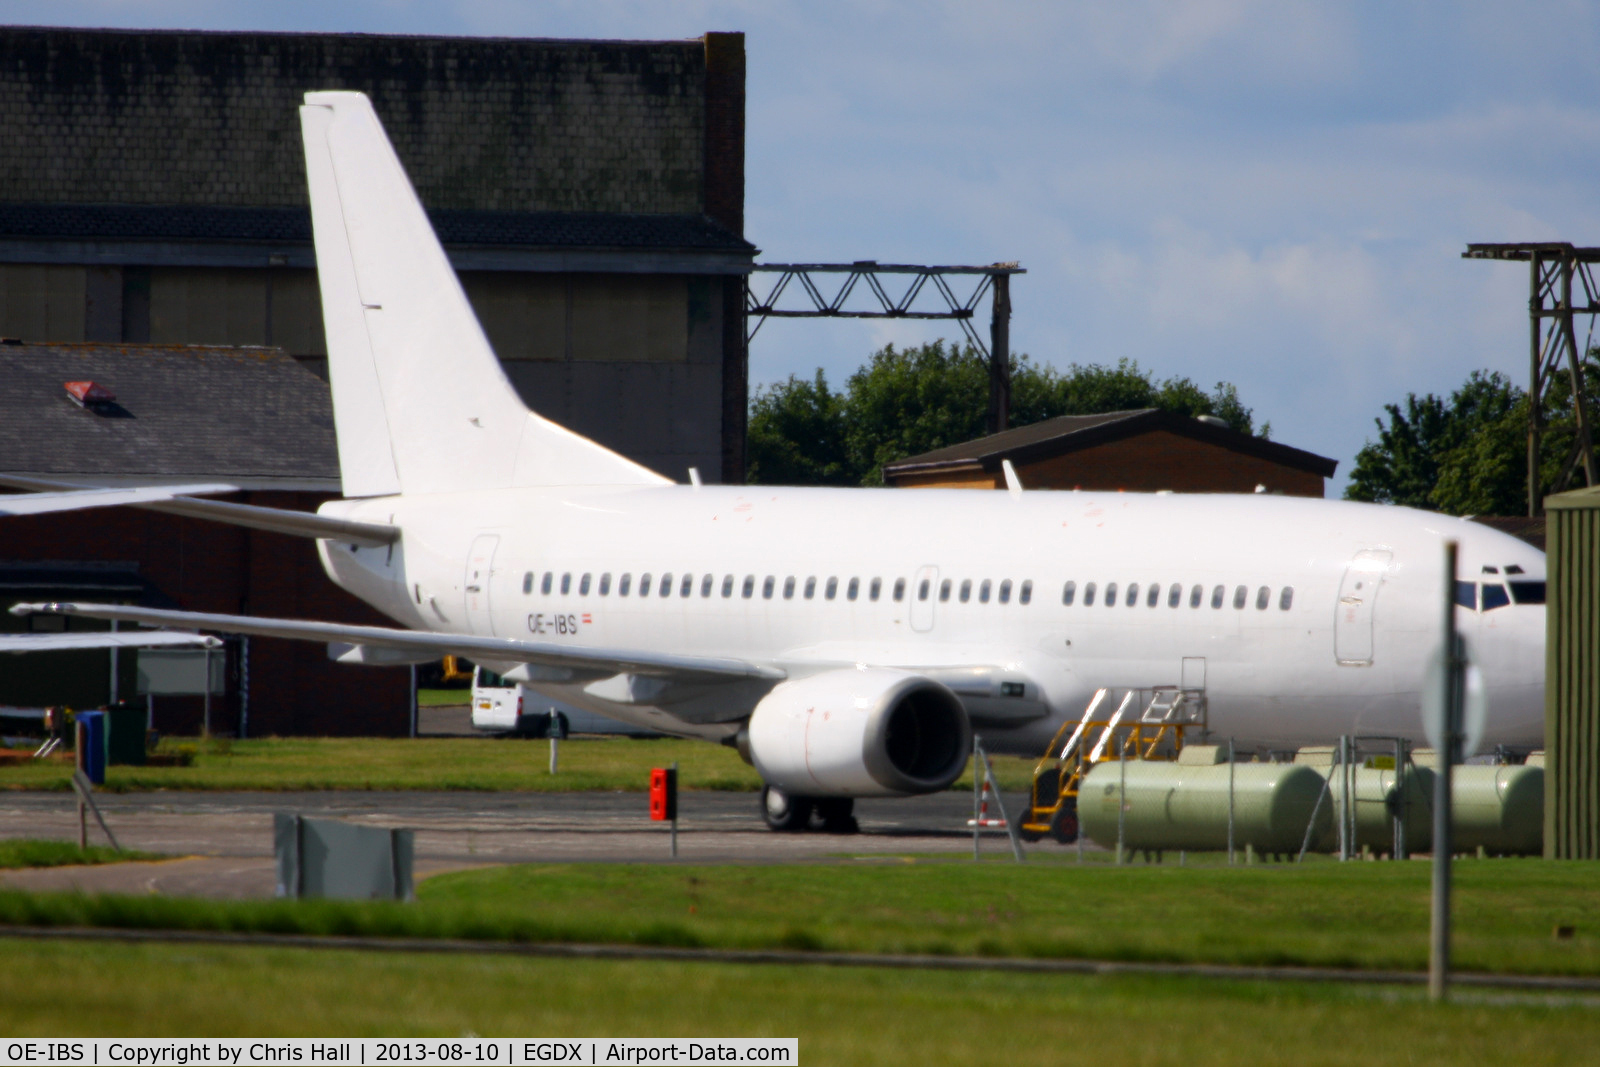 OE-IBS, 1987 Boeing 737-3S3 C/N 23788, in storage at St Athan